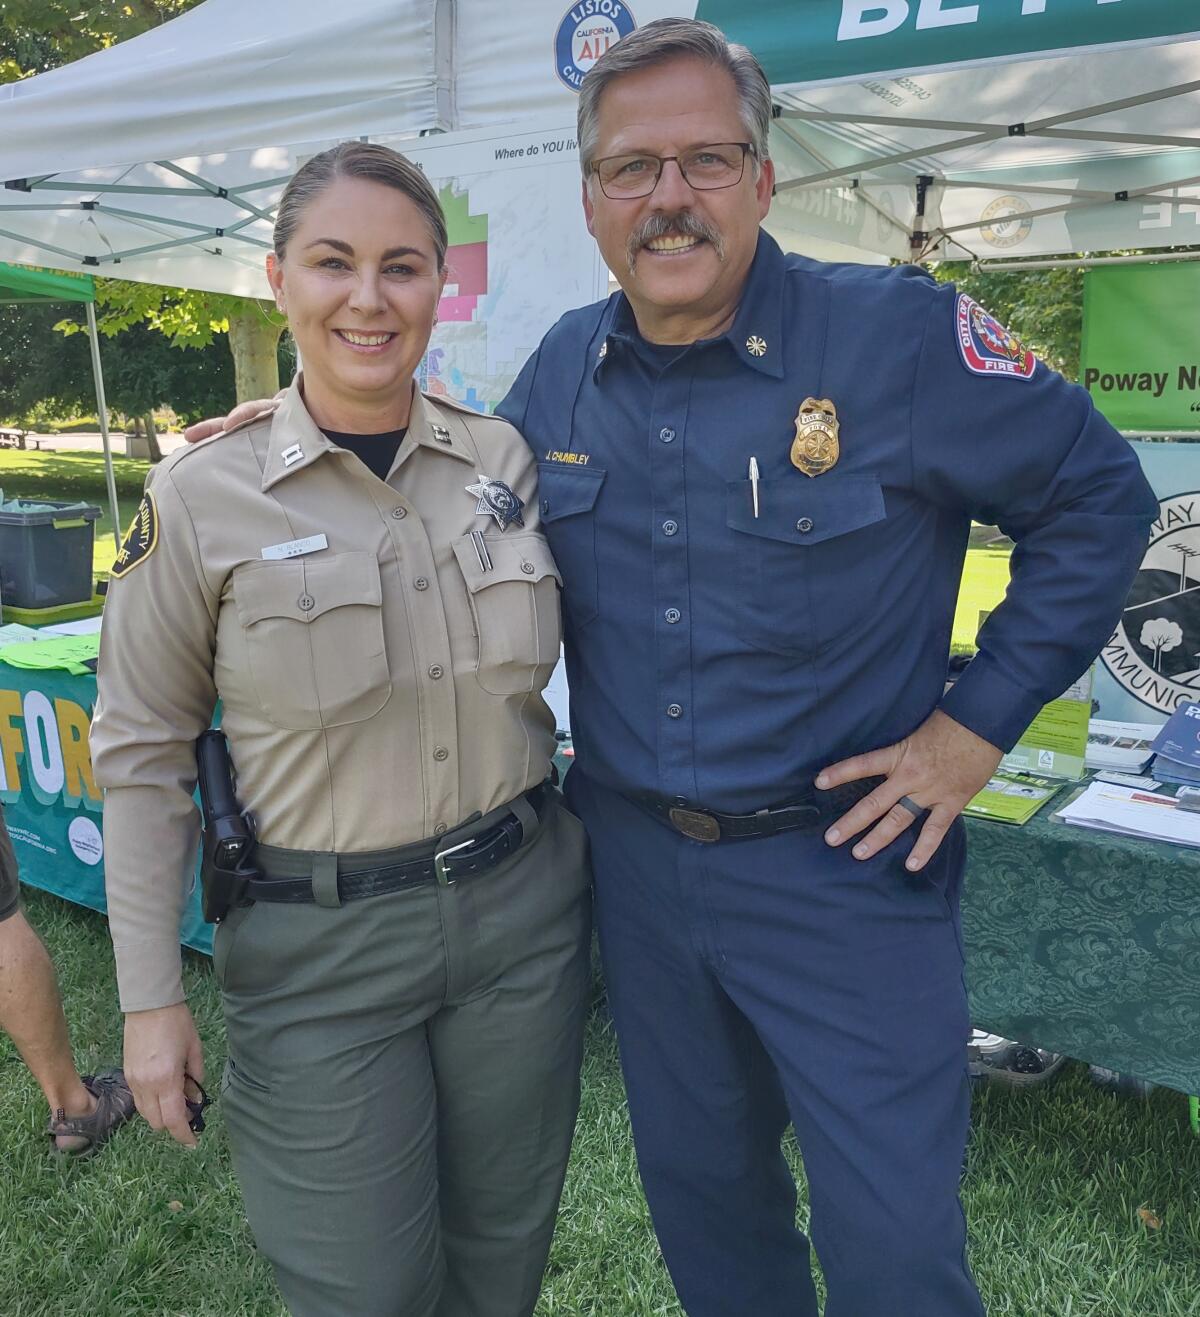 Poway Sheriff’s Capt. Nancy Blanco and Poway Fire Chief Jeff Chumbley greet visitors at National Night Out.